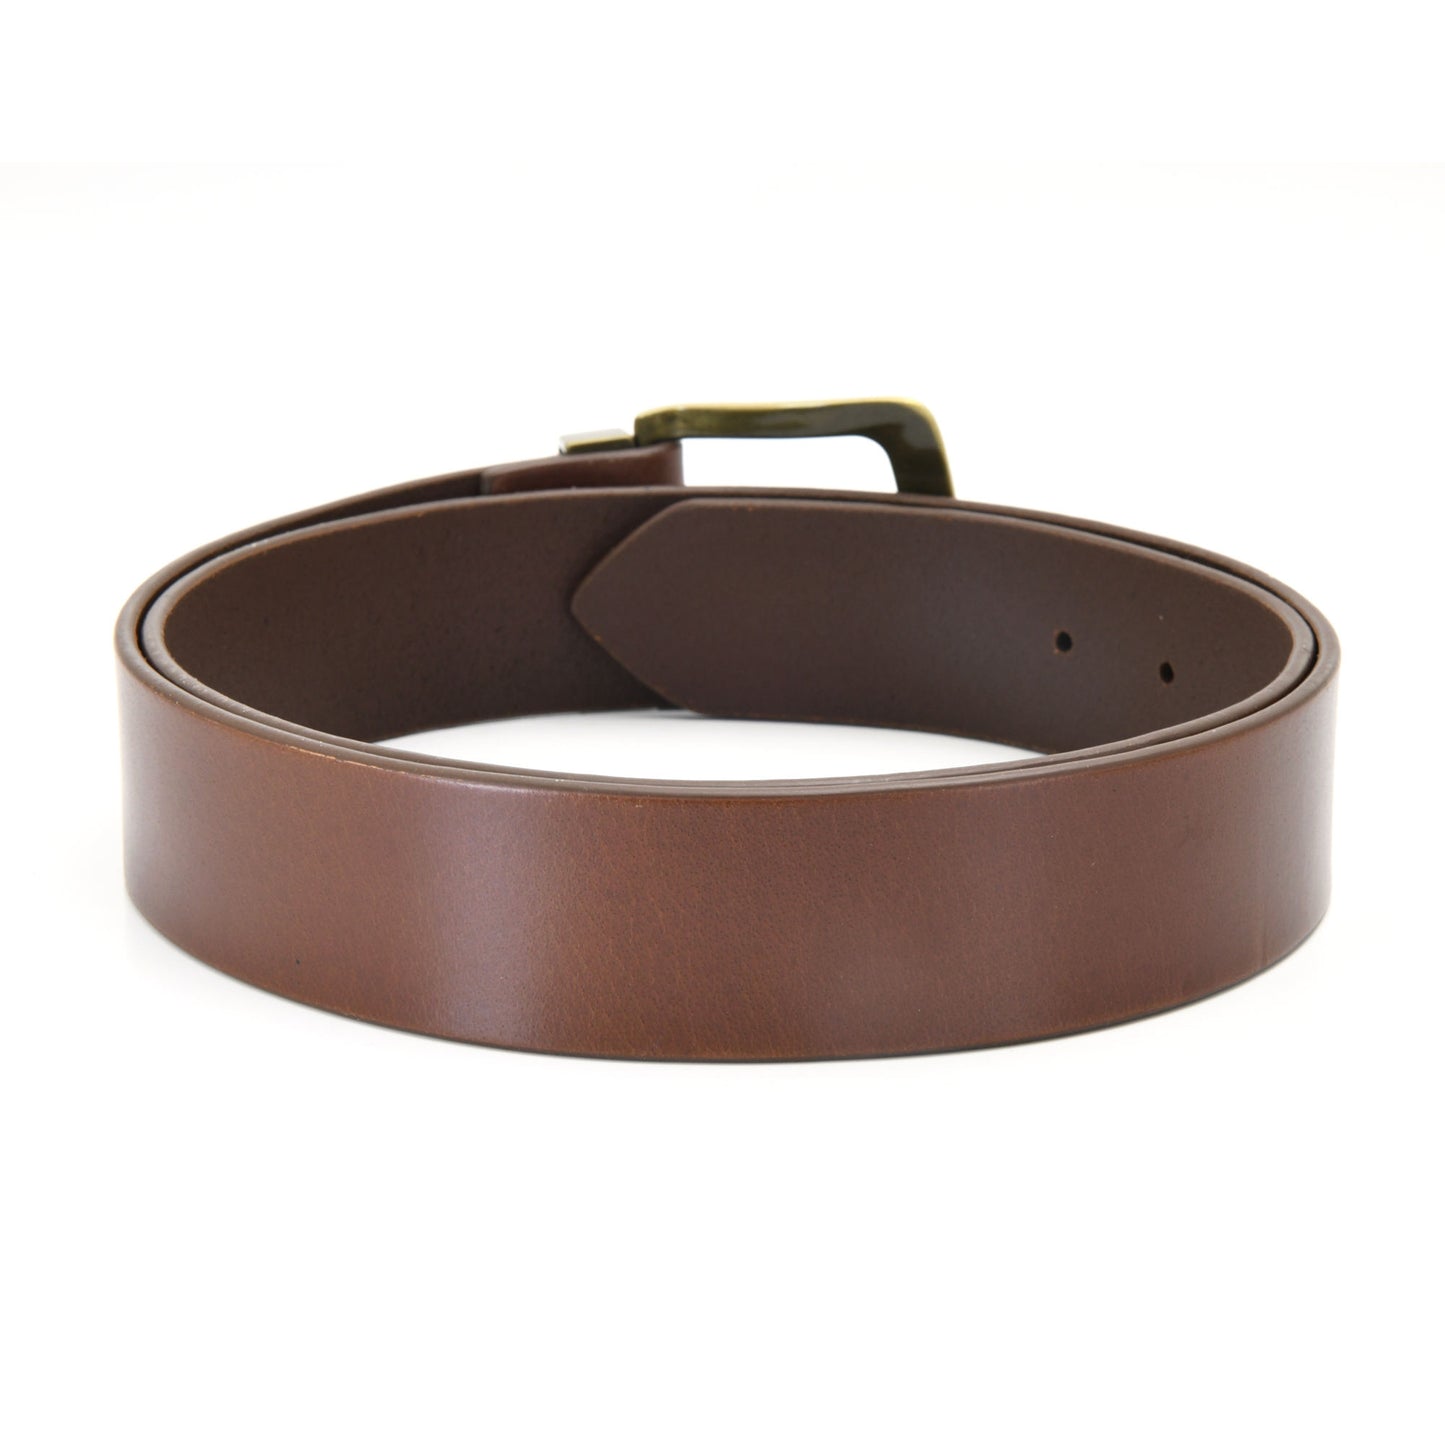 392713 - one and a half inch wide leather belt in dark tan color full grain leather with matte gold finish metal buckle & loop - back view